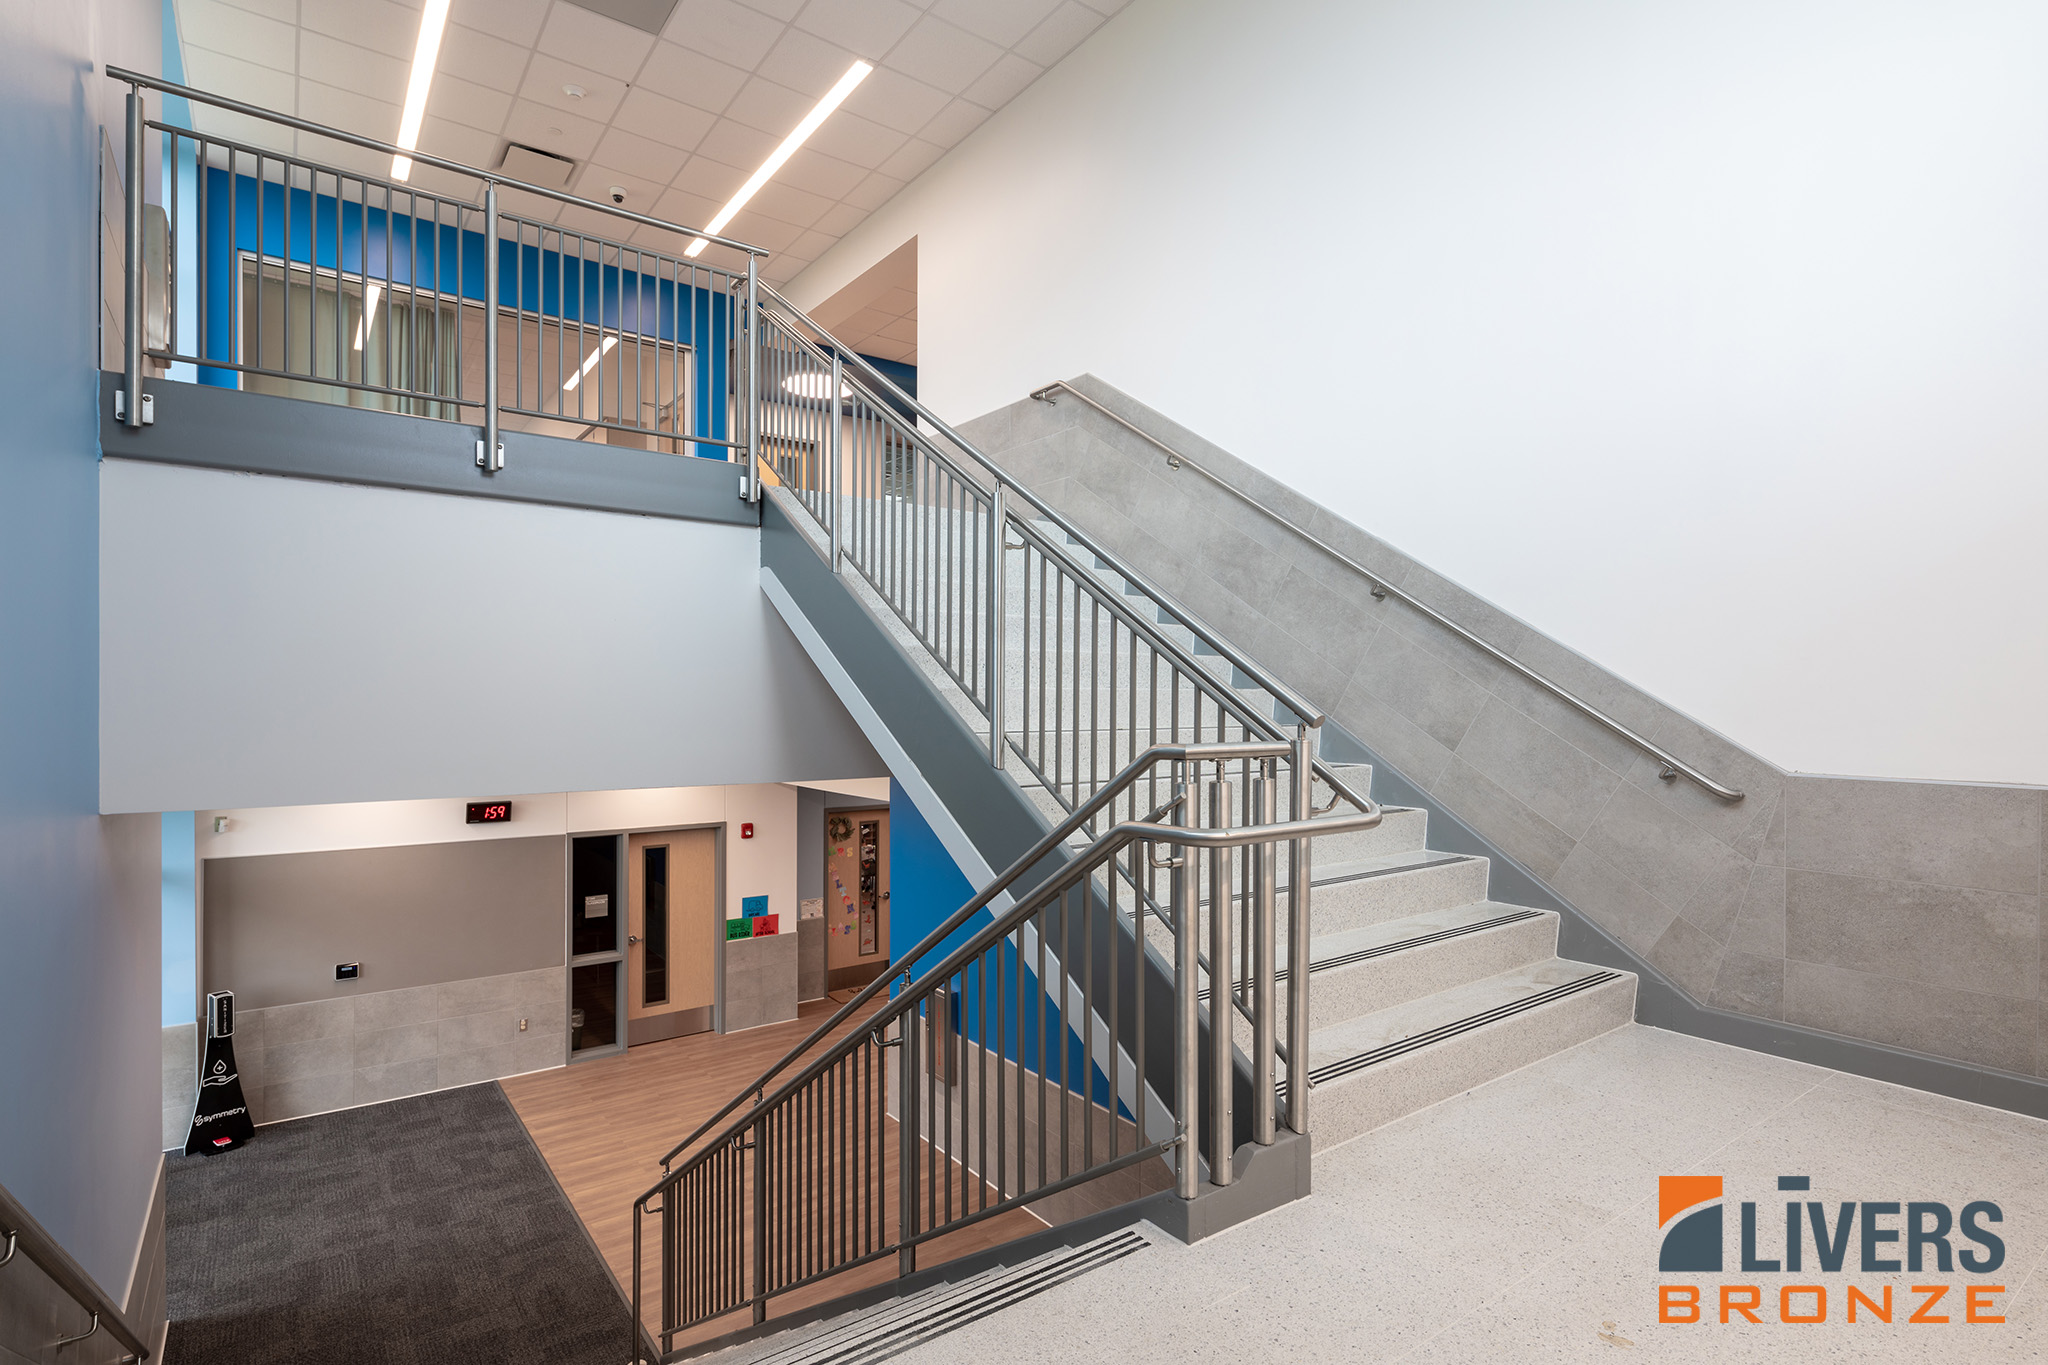 Livers Bronze Mirage with Stainless Steel Picket Railings were installed in the interior stairway at Red Bud Elementary School, Austin, Texas, and are Made in the USA